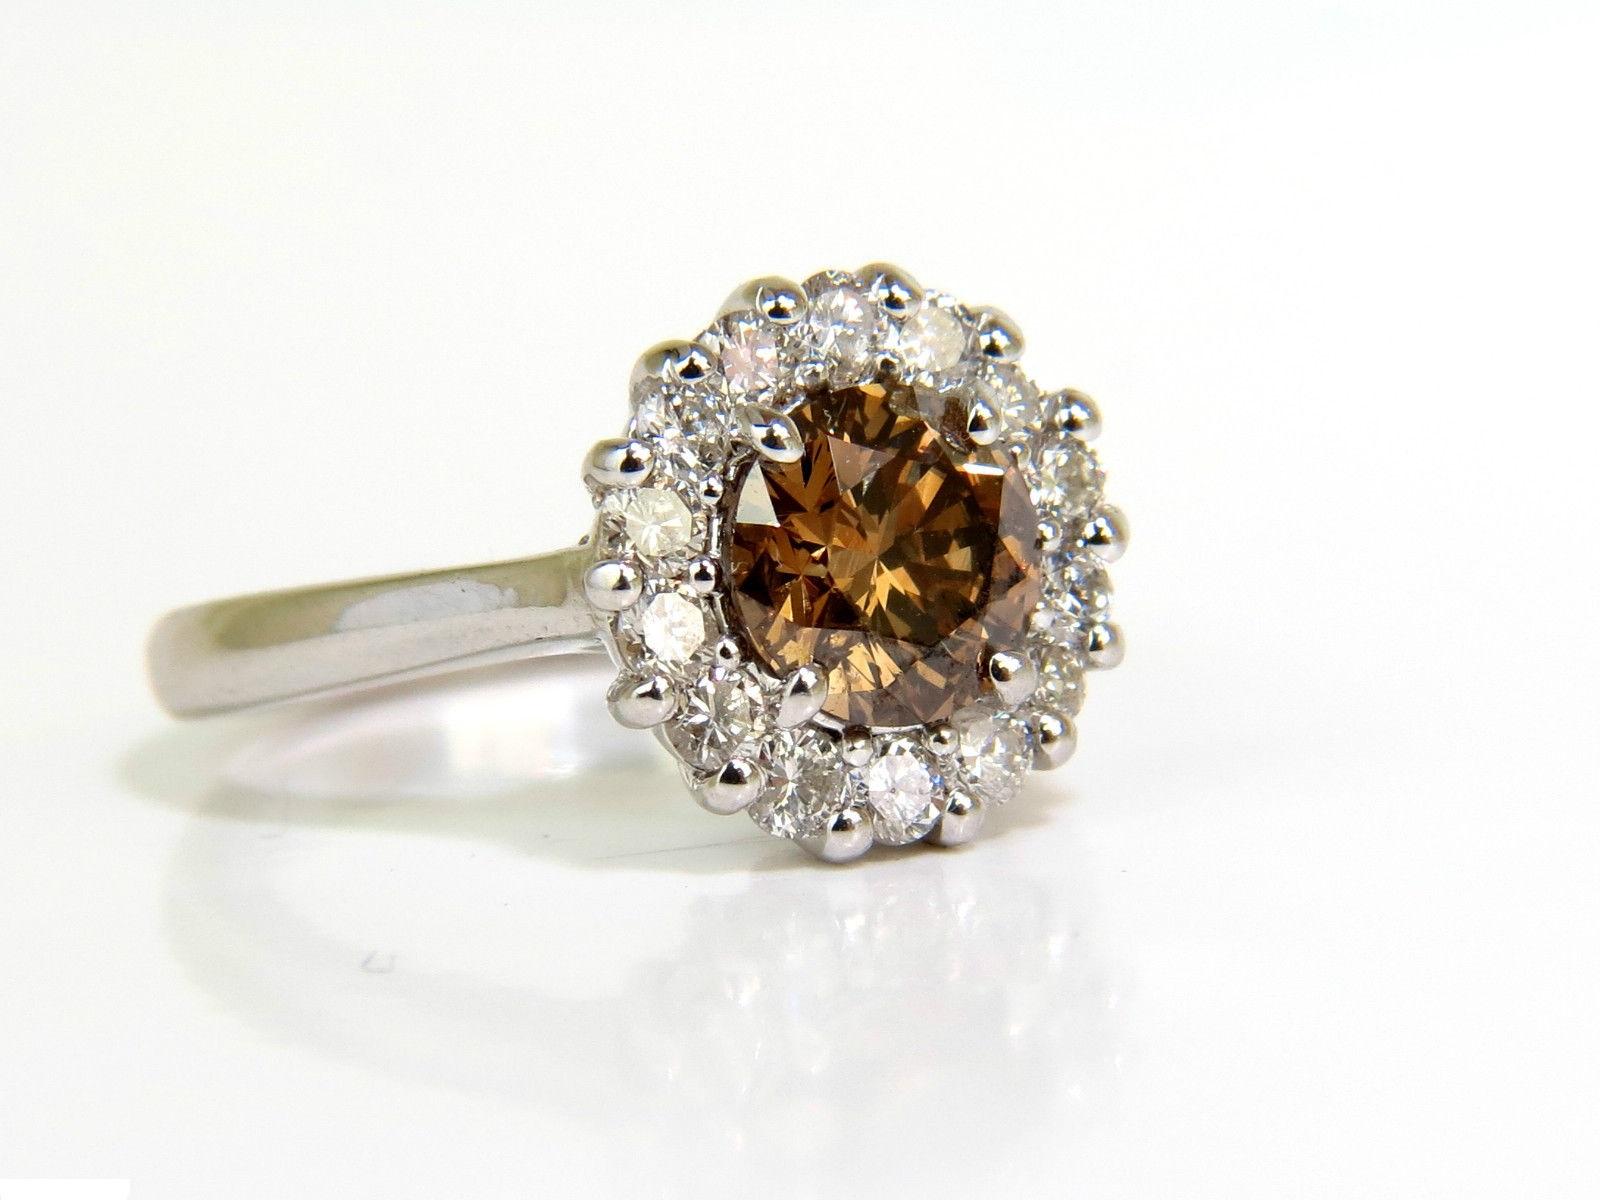 2.01 Carat Natural Fancy Orange Brown Diamond Cluster Halo Ring G/VS Full Cuts For Sale 5